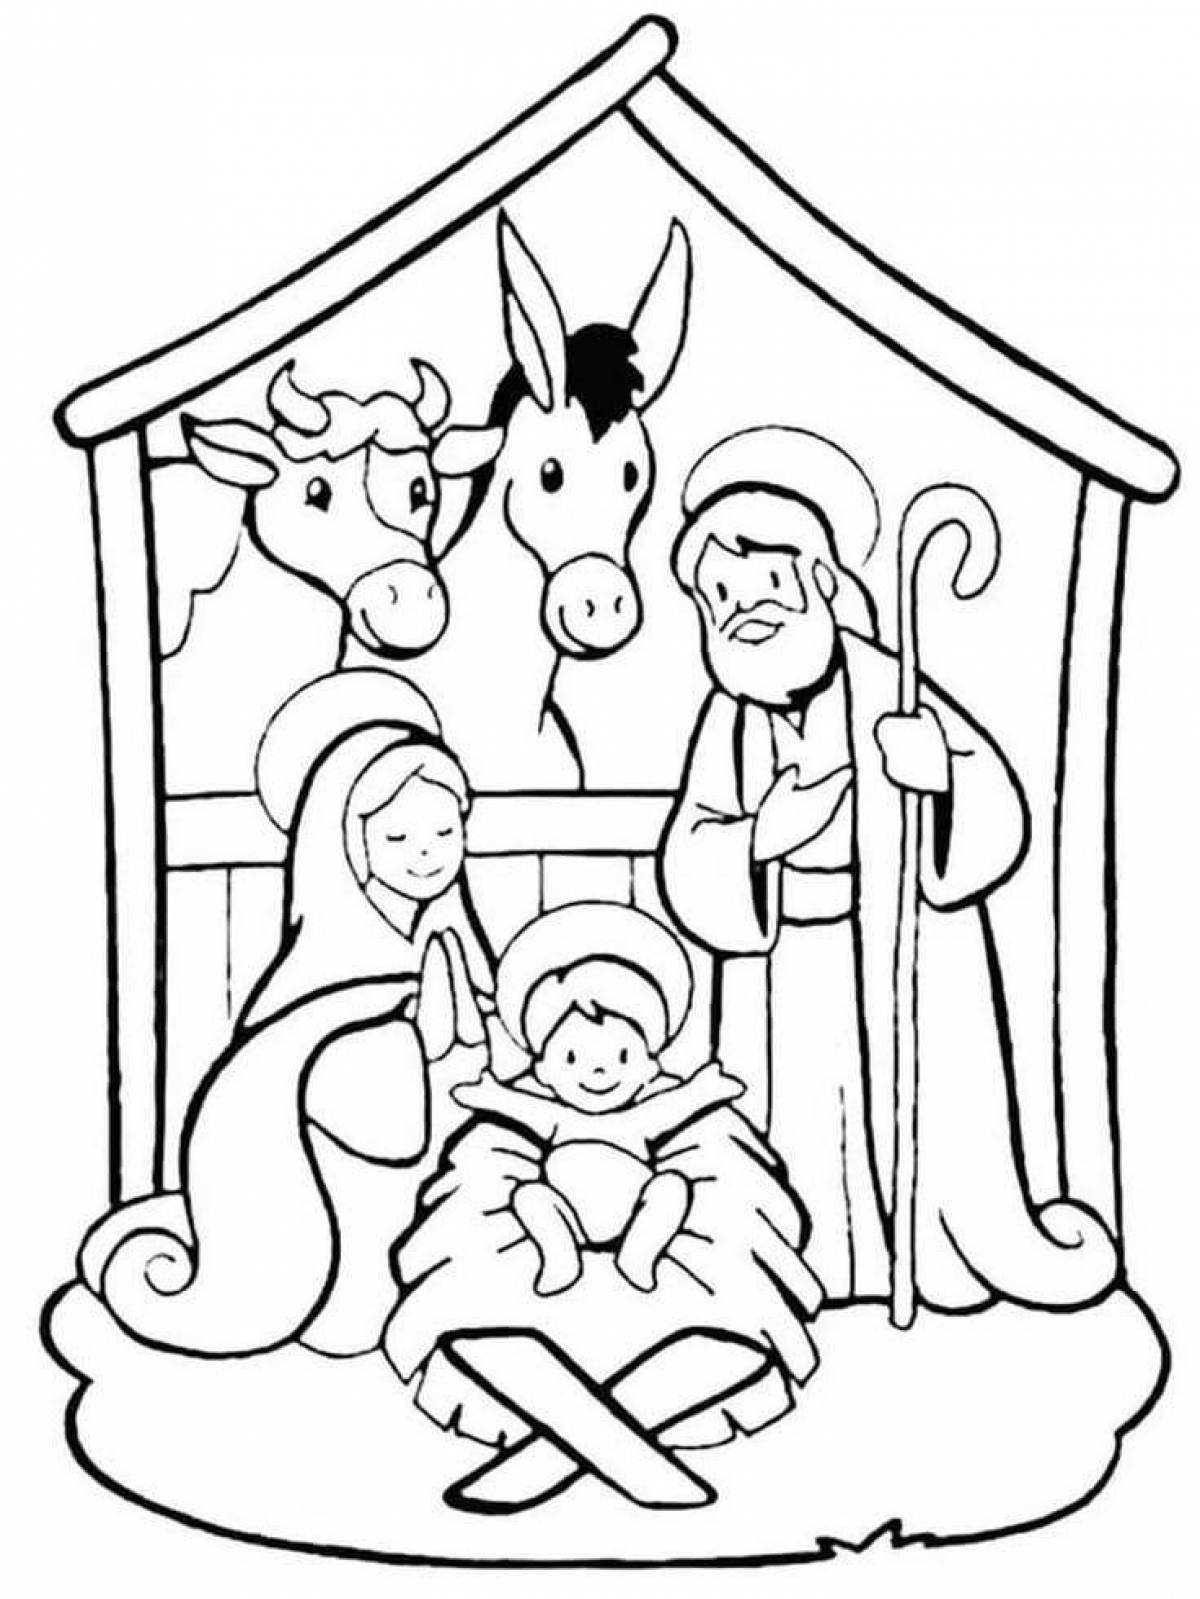 Exciting merry christmas baby coloring book